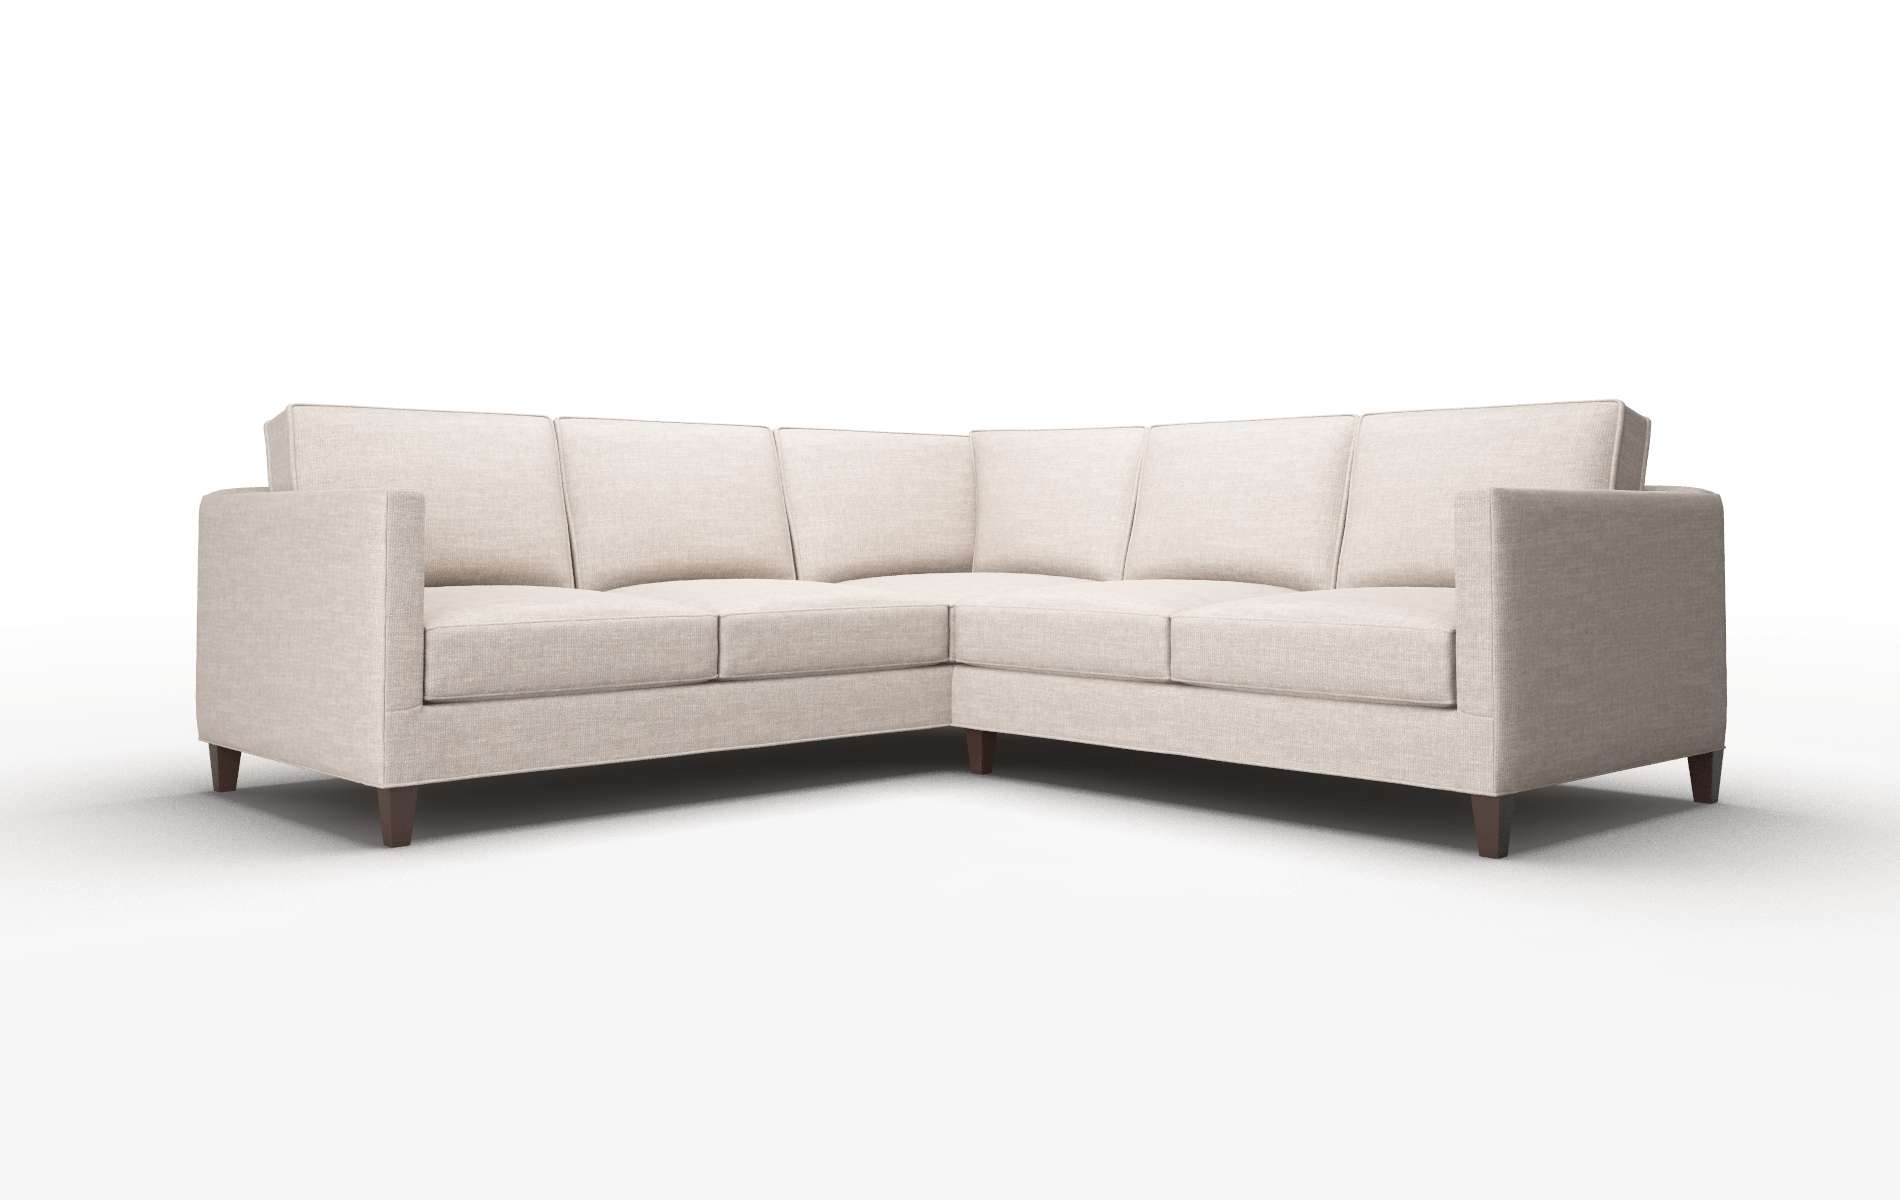 Alps Clyde Dolphin Sectional espresso legs 1